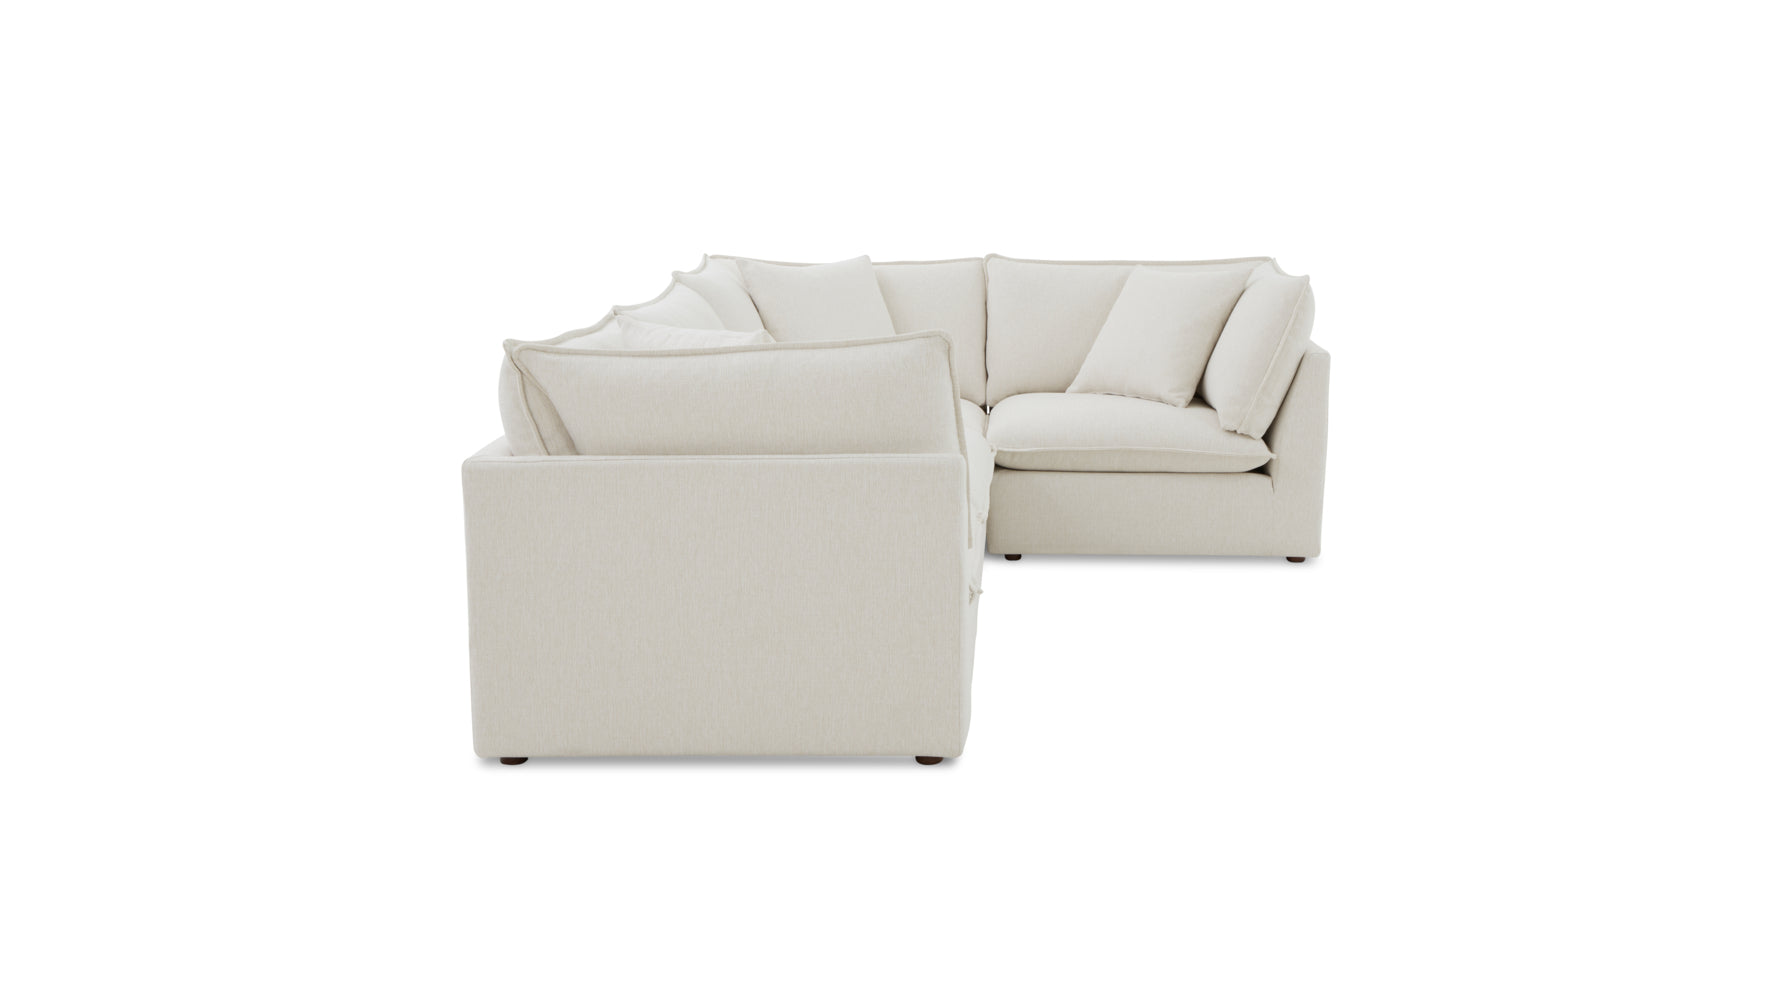 Chill Time 4-Piece Modular Sectional Closed, Birch - Image 4